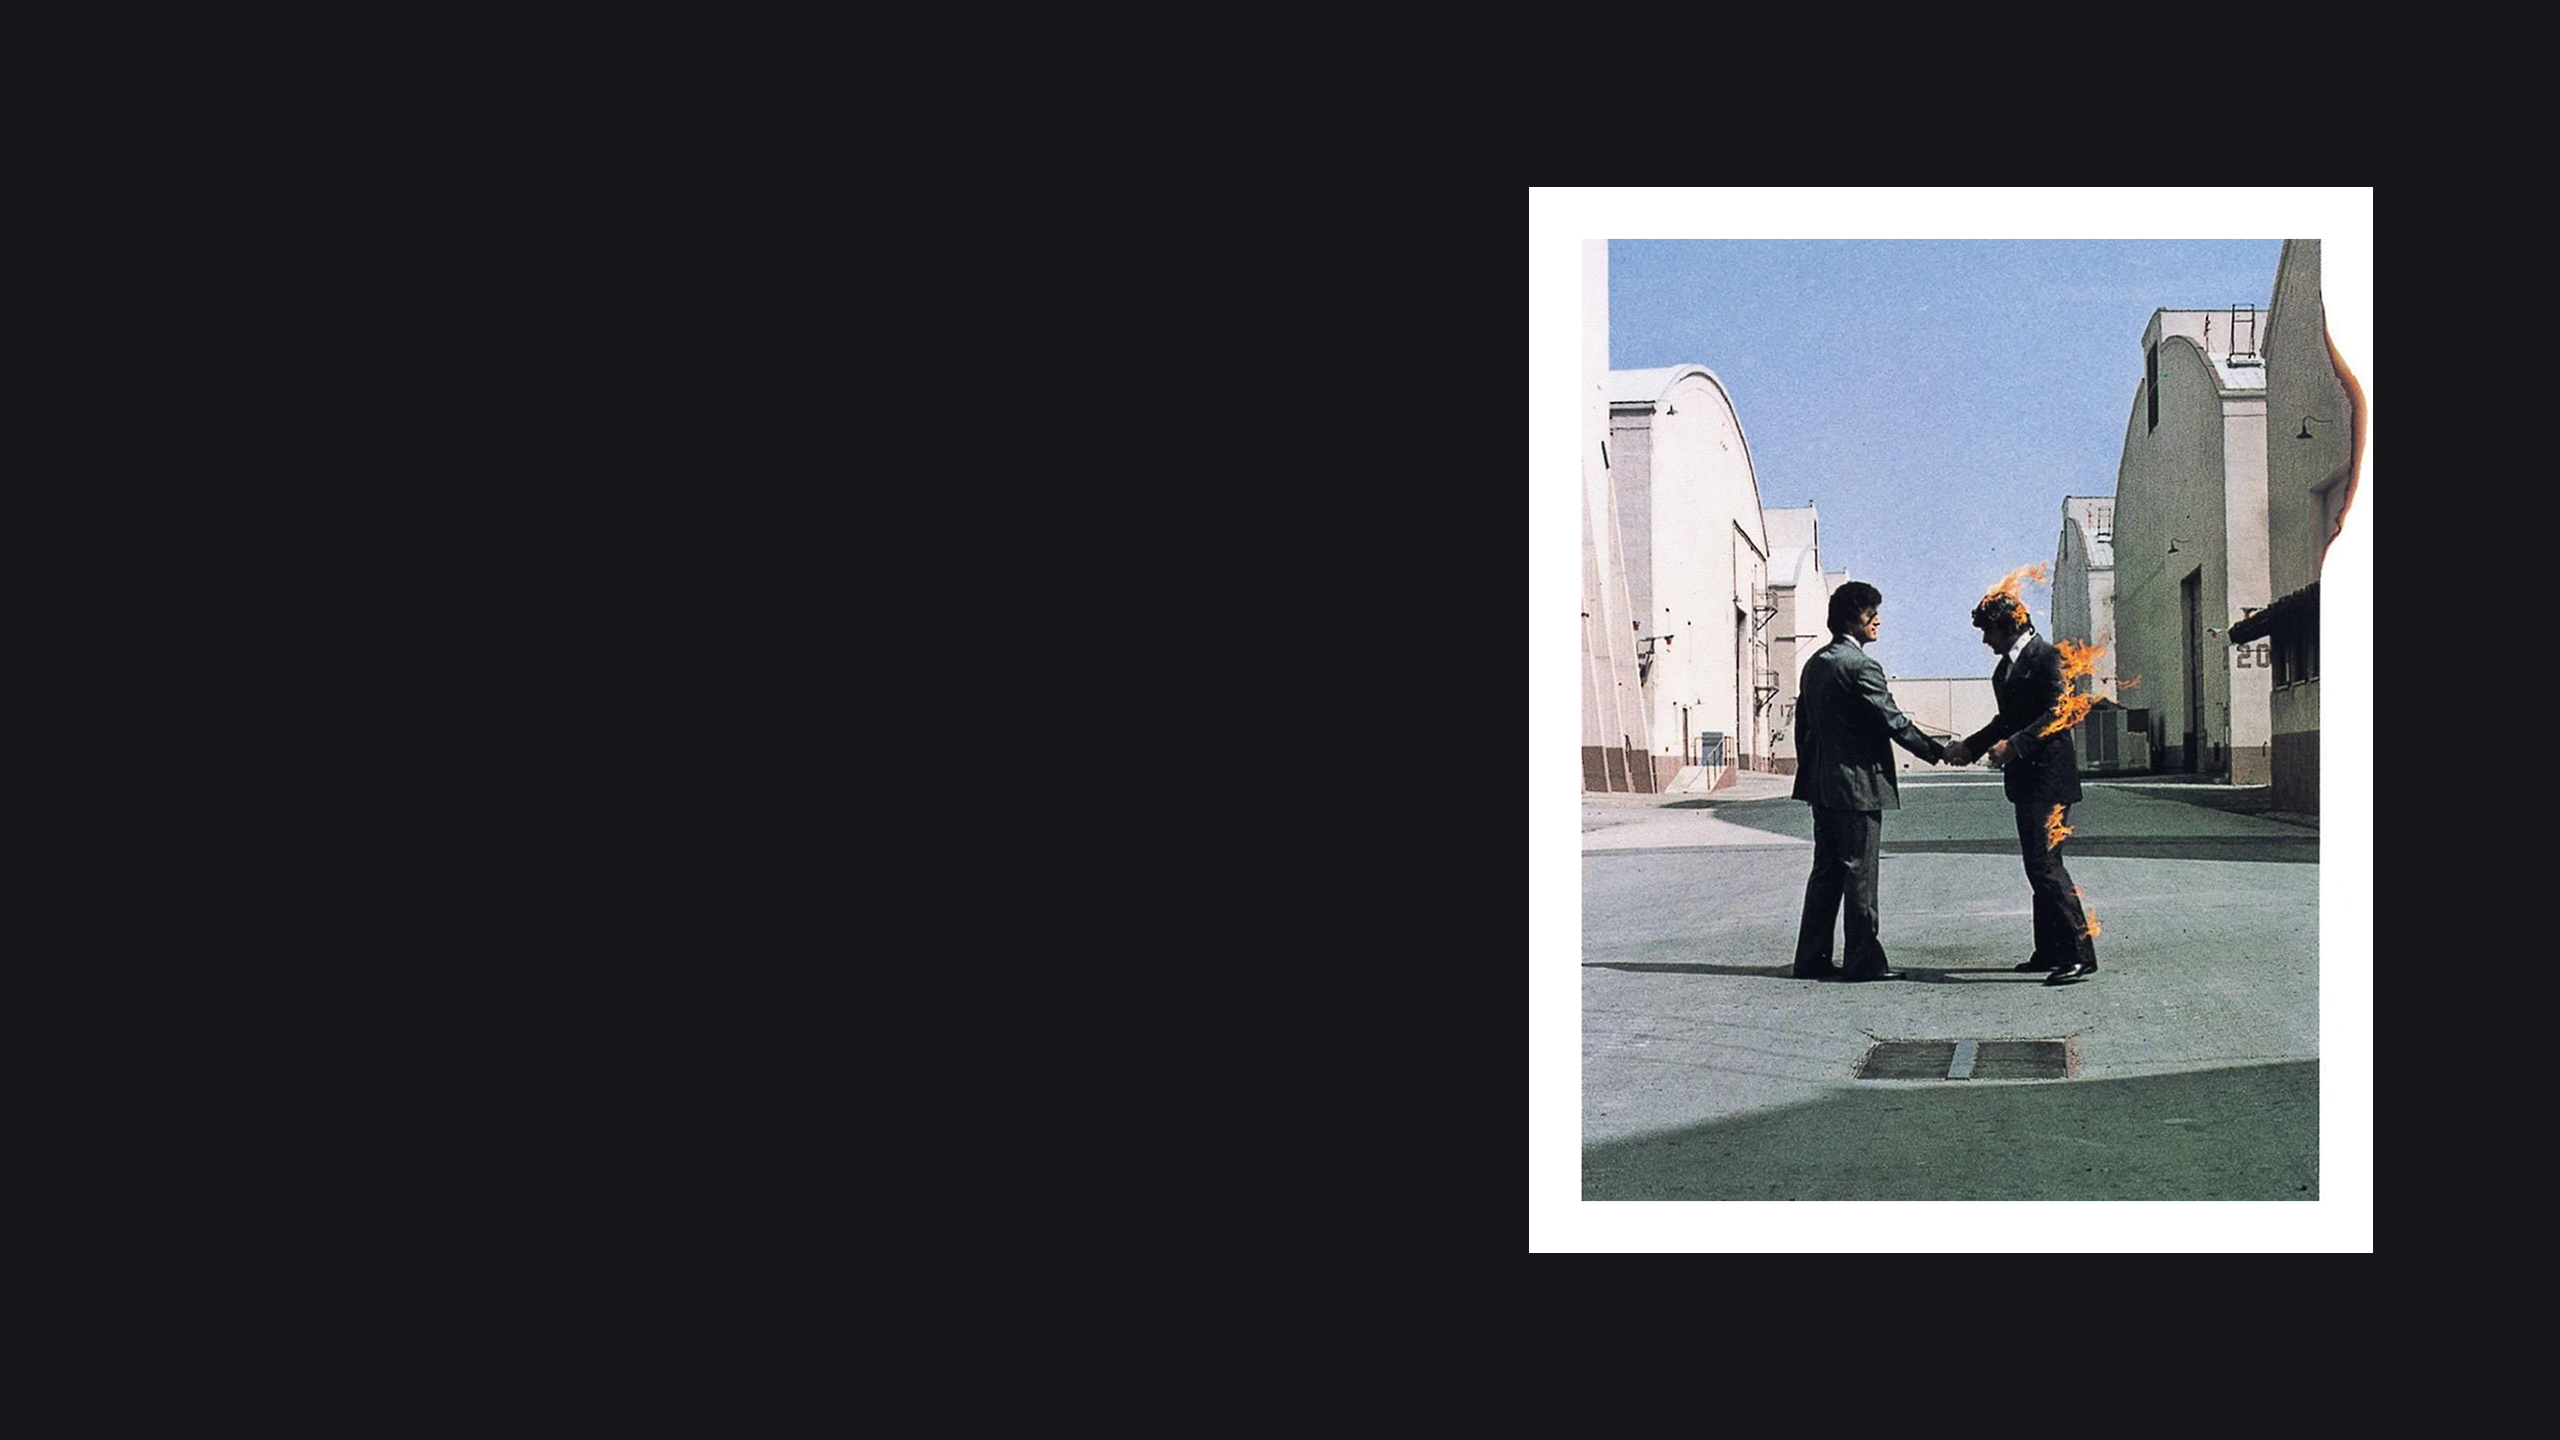 General 2560x1440 black background Pink Floyd wish you were here album covers cover art band